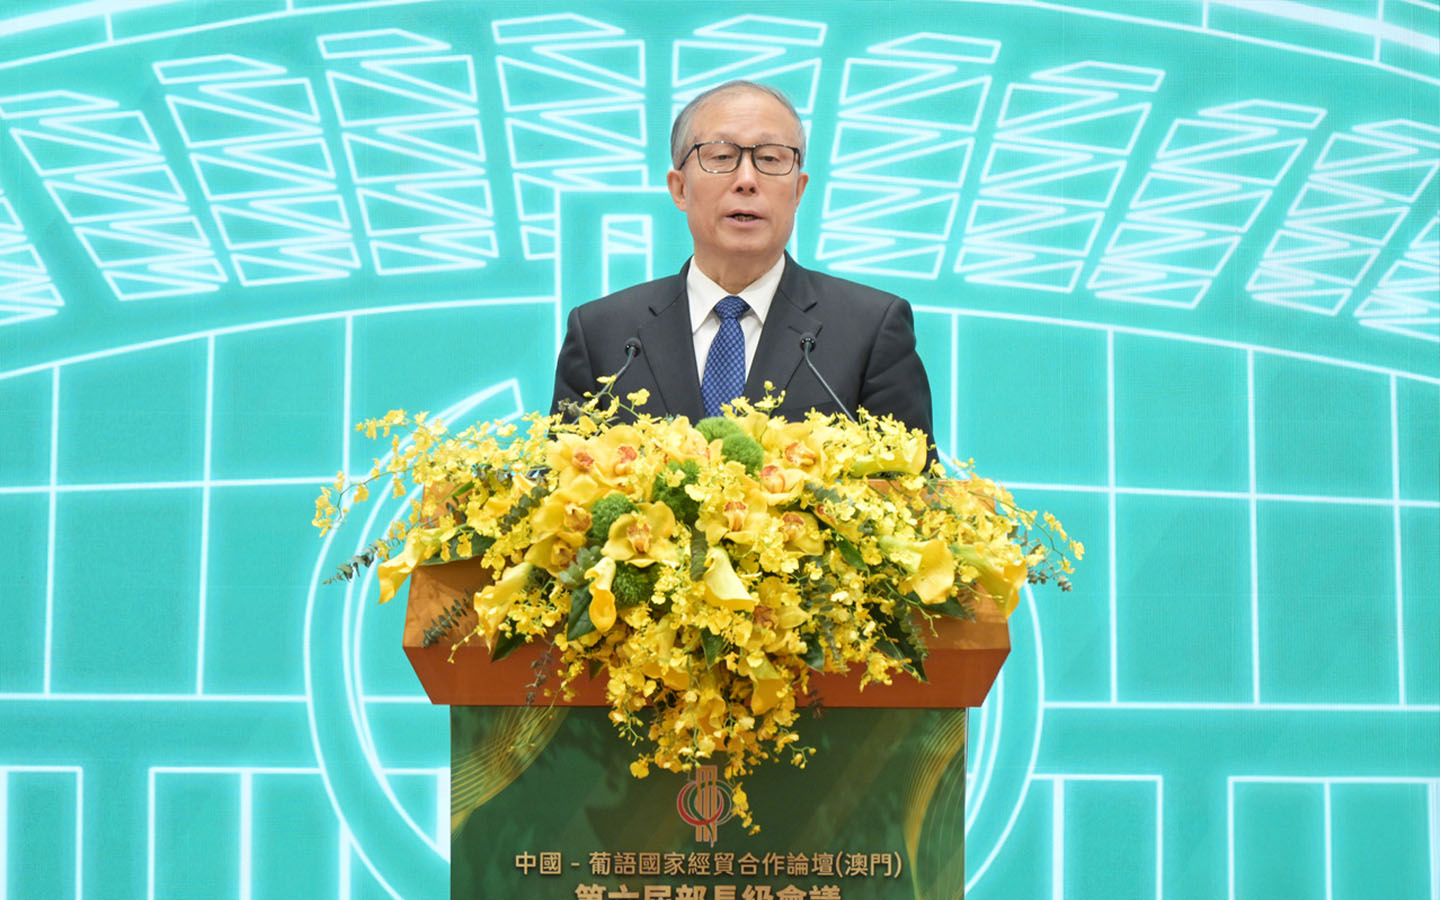 Forum Macao eyes new areas of cooperation